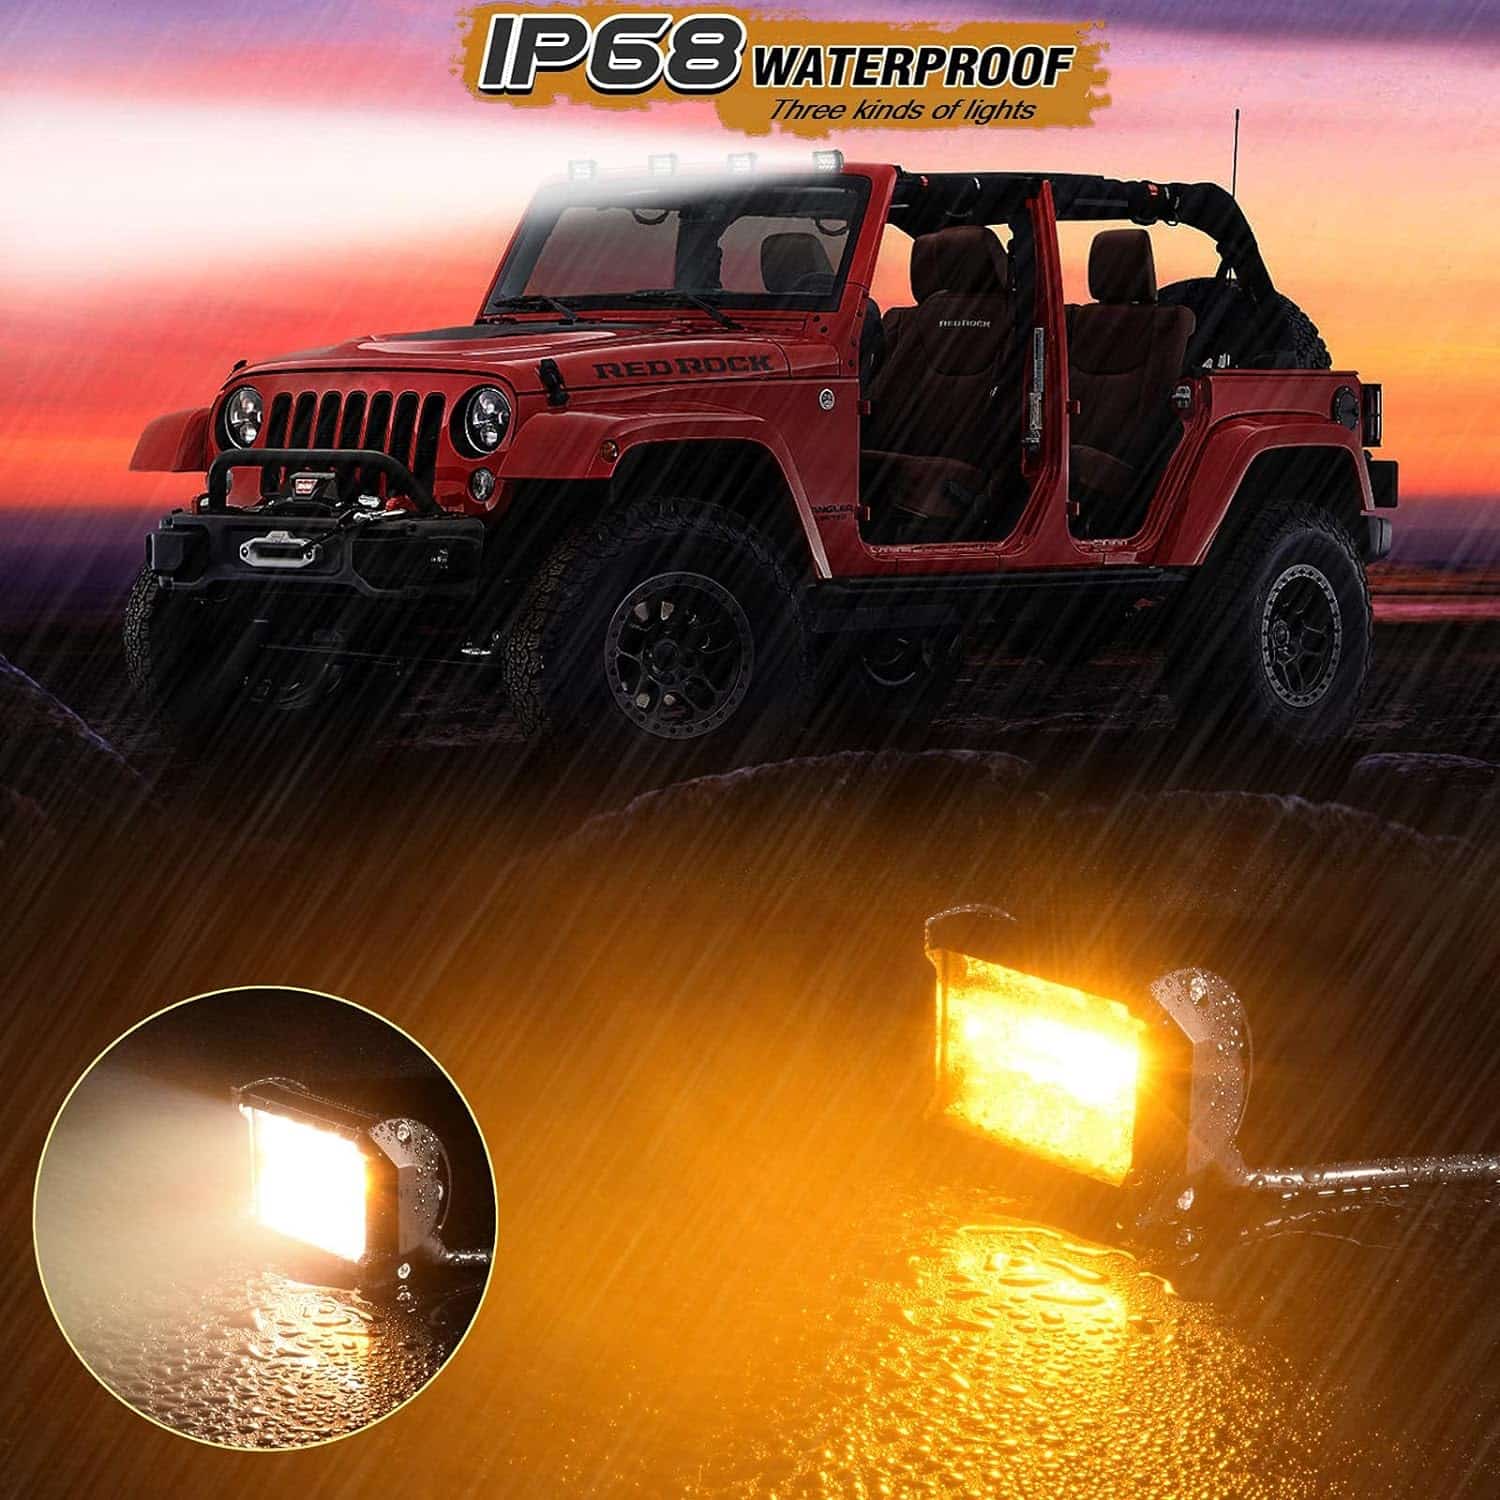 BEAMPLUS+ 5inch Amber White LED Light Bar, 42W 4200Lm, IP68 Waterproof, Suitable for Off Road Vehicles, Trucks, ATVs, UTVs, Boats, Heavy Equipment, Industrial Lighting